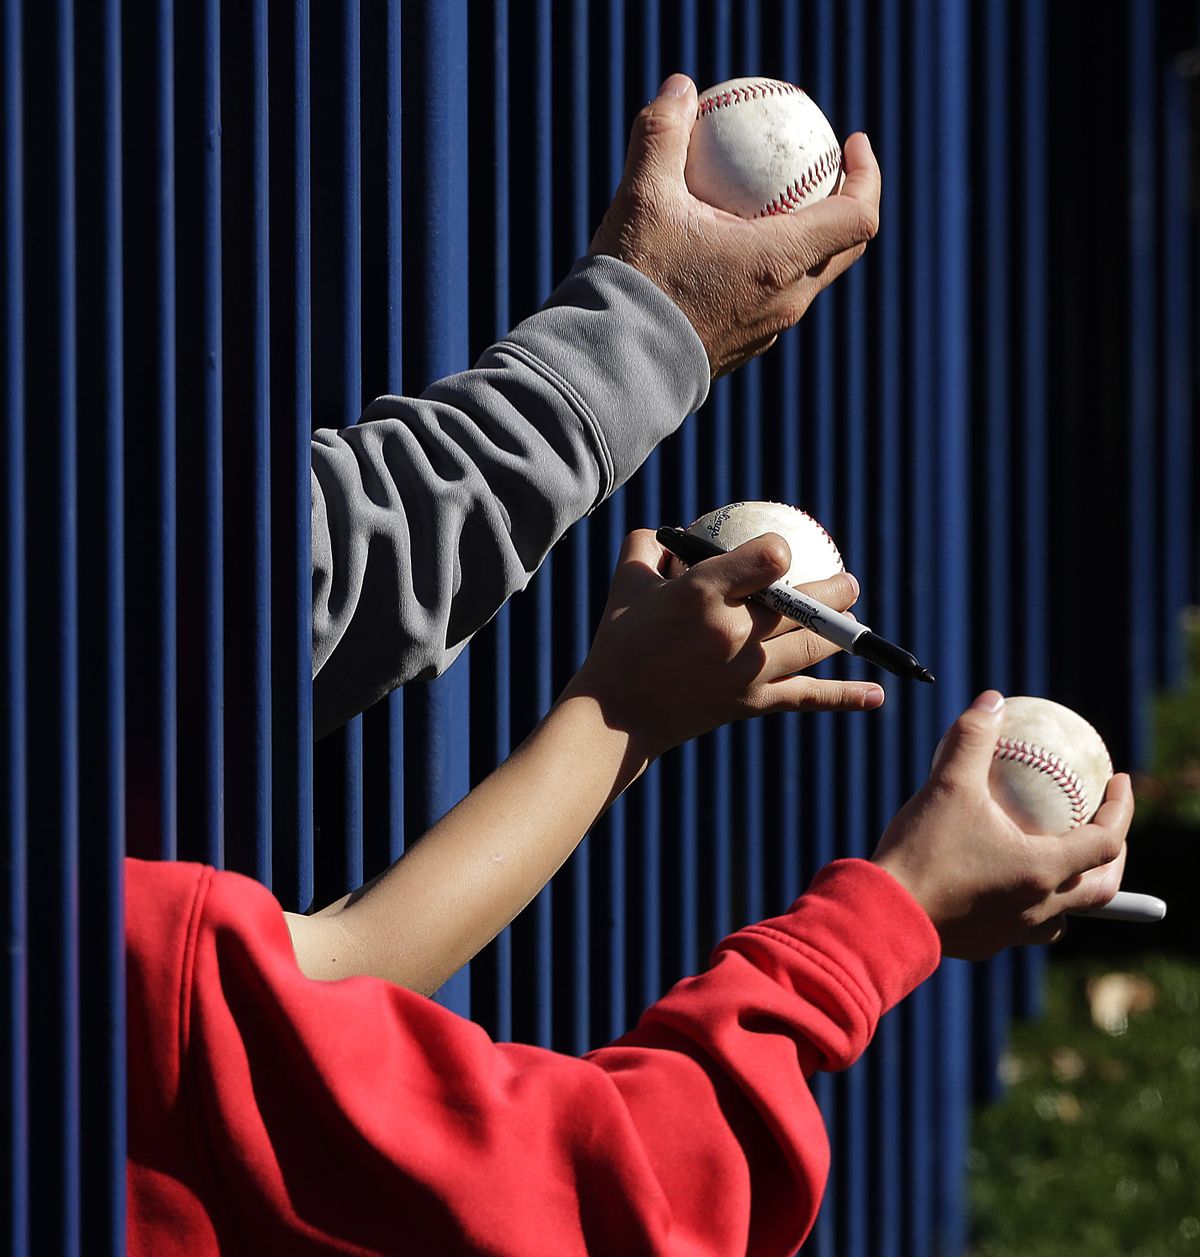 Fans armed for autographs reach through a fence trying to entice Mariners players to sign Monday. (Associated Press)